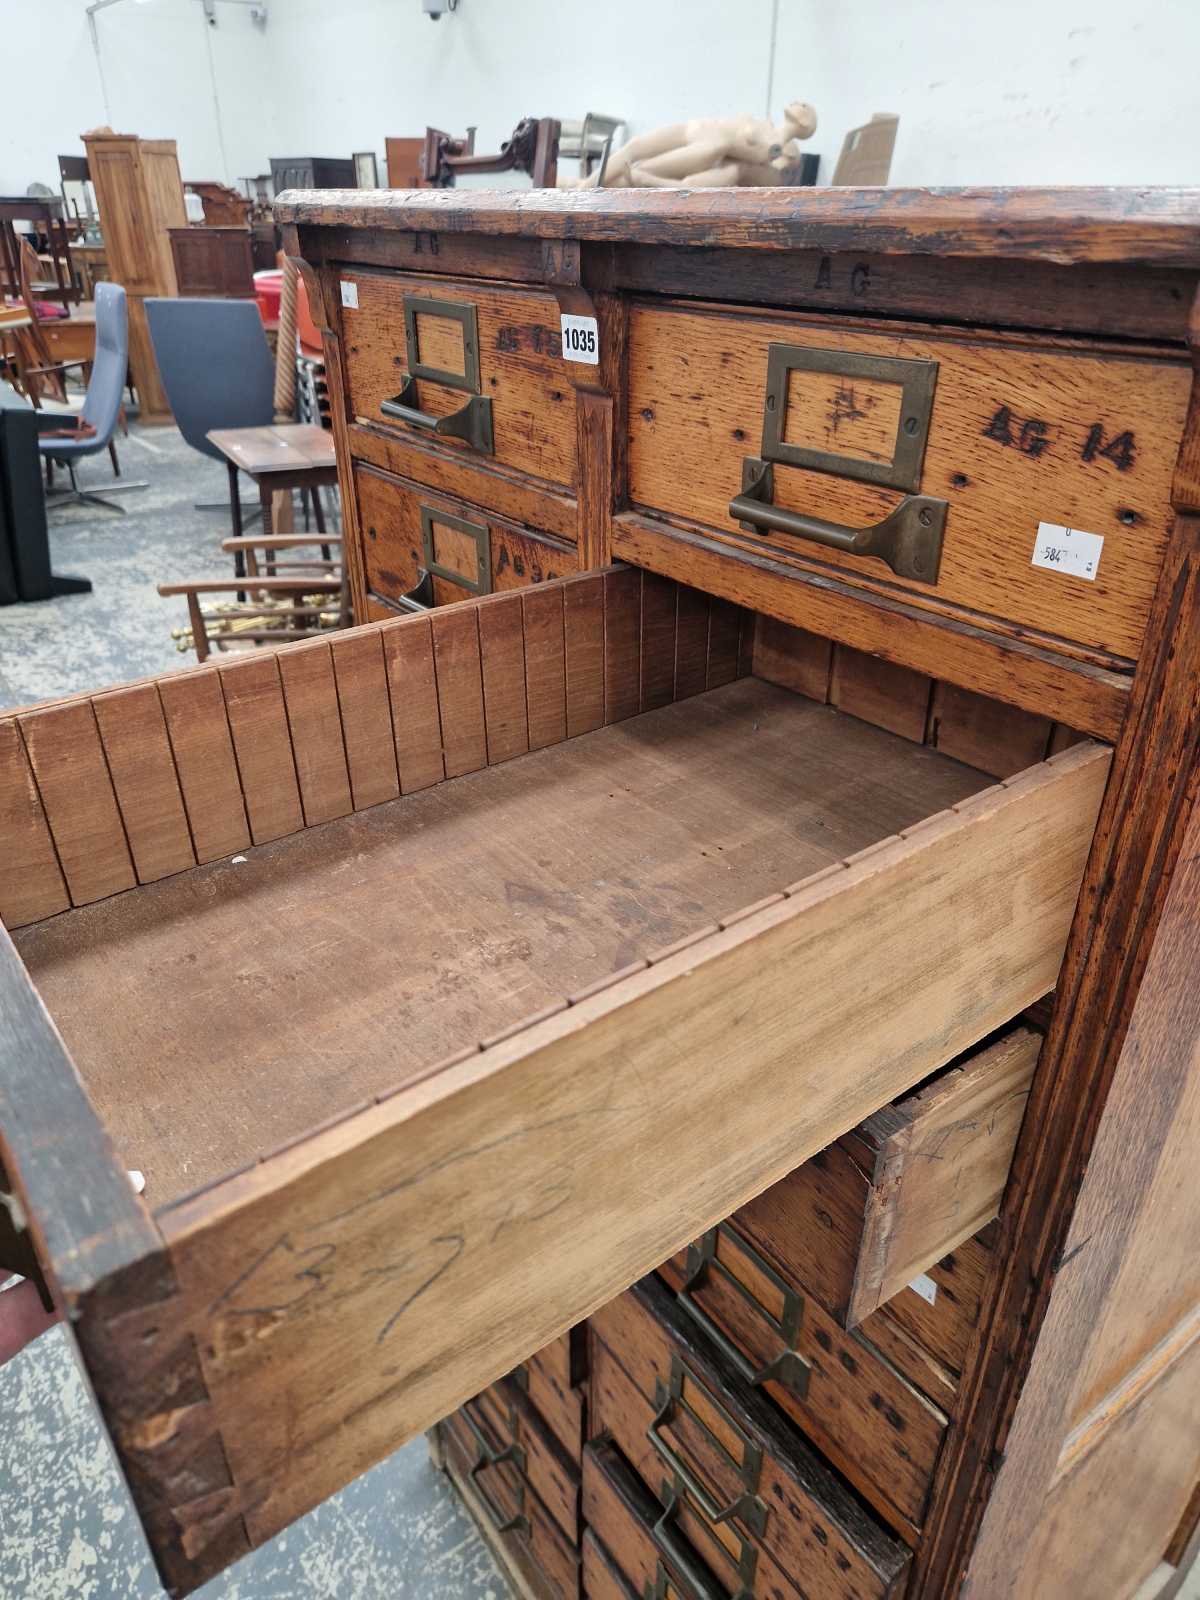 AN OAK VINTAGE CABINET OF TWO BANKS OF TEN DRAWERS EACH TO TAKE DIVISIONS TO FORM COMPARTMENTS. - Image 5 of 8